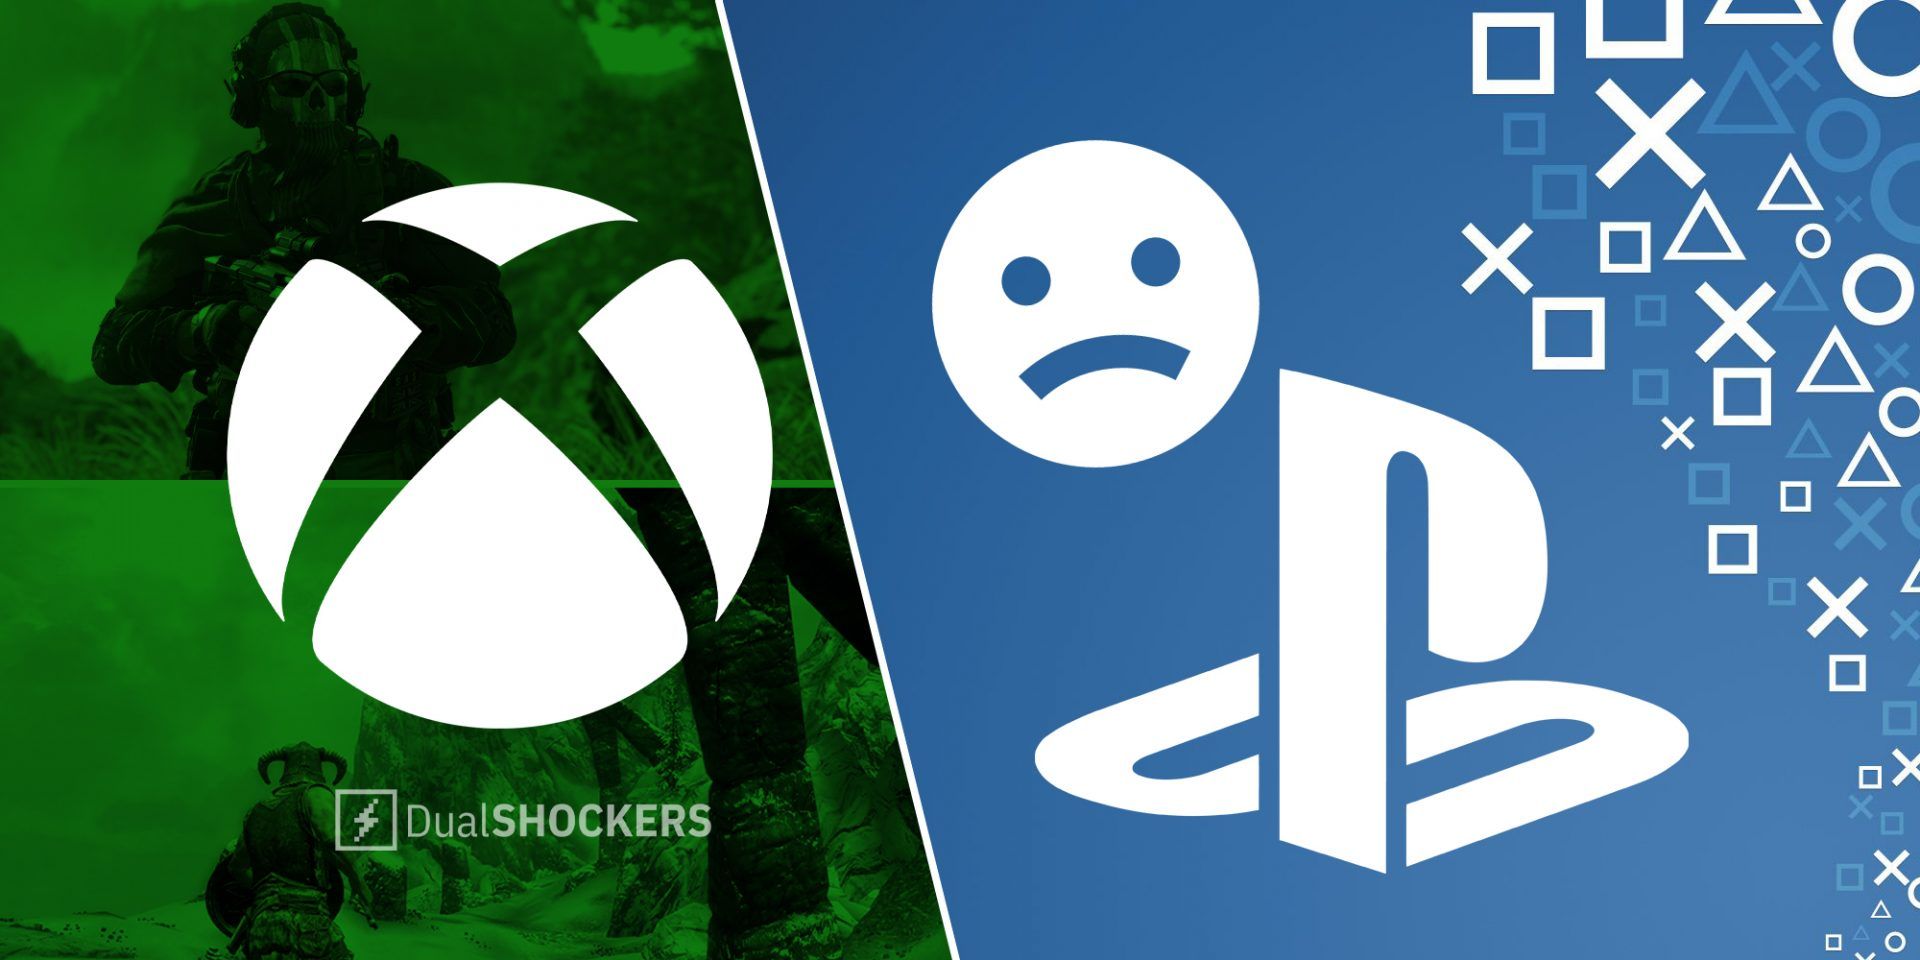 Call of Duty and Skyrim with Xbox logo overlaid on left, Playstation logo and sad emoji on right